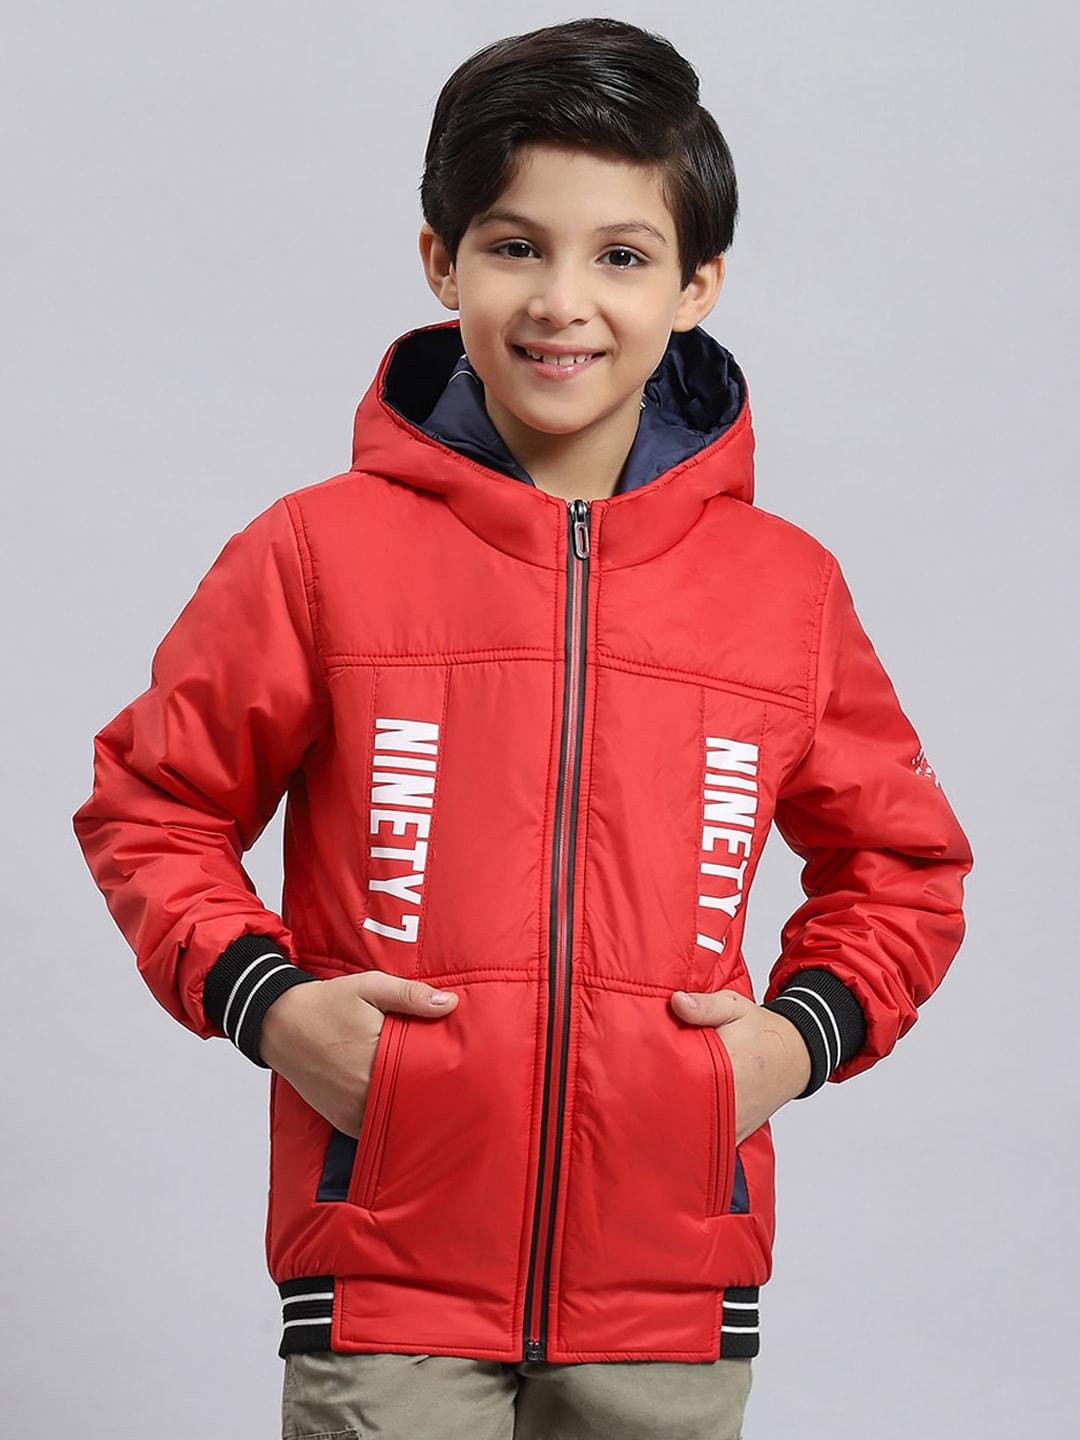 monte carlo boys typography printed lightweight open front jacket